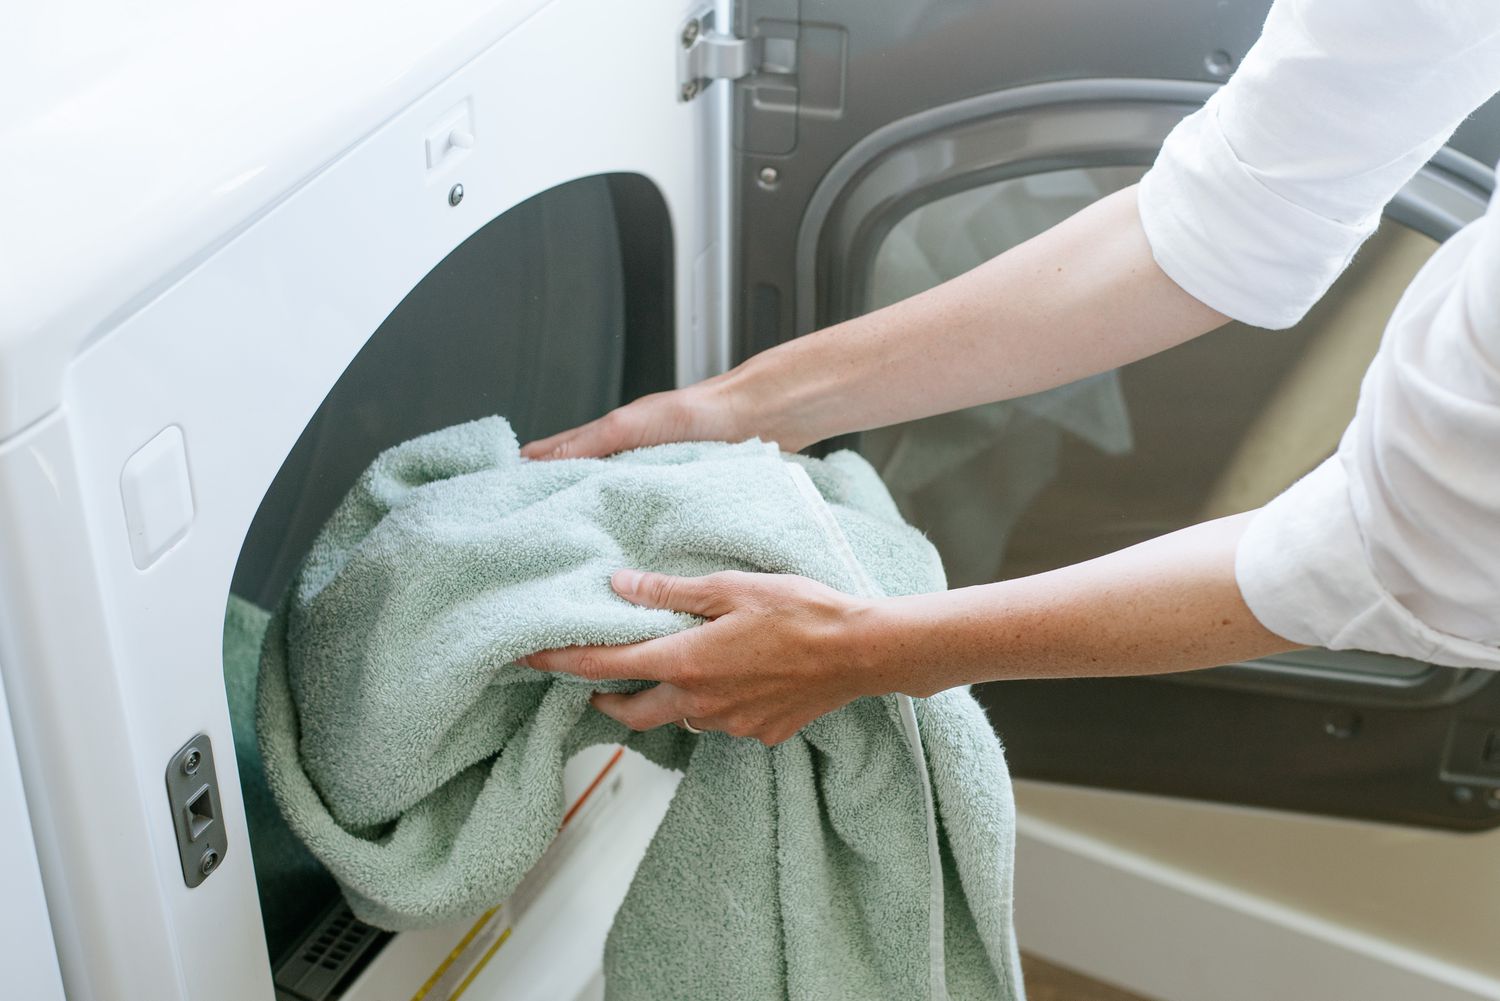 Dryer Not Drying Clothes: What to Check and How to Fix?